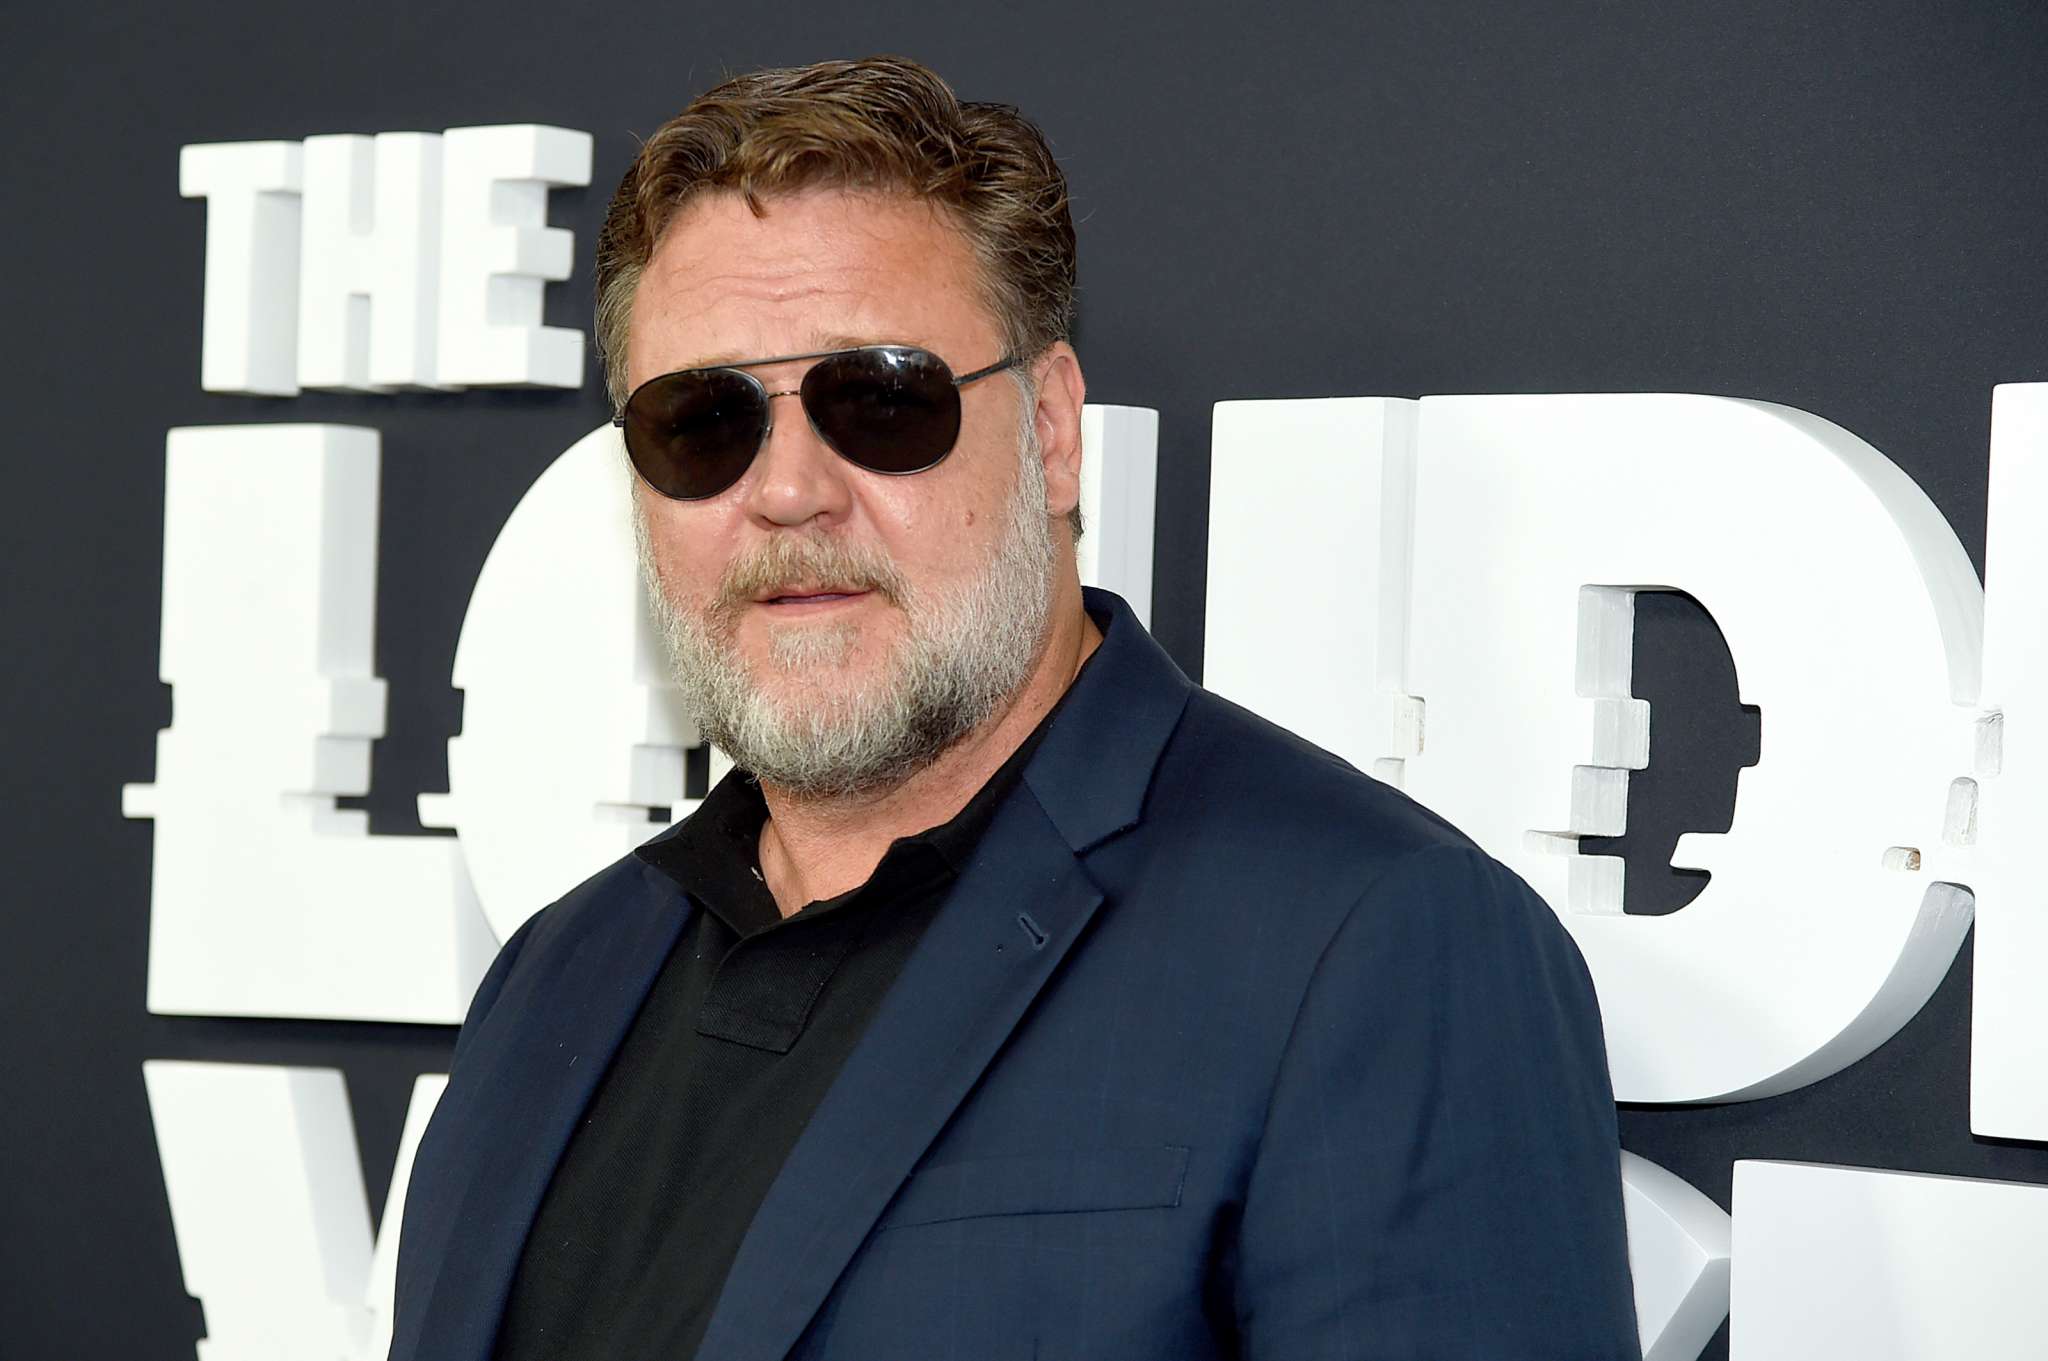 Russell Crowe Returns To The Colosseum 22 Years After The Release Of The Gladiator